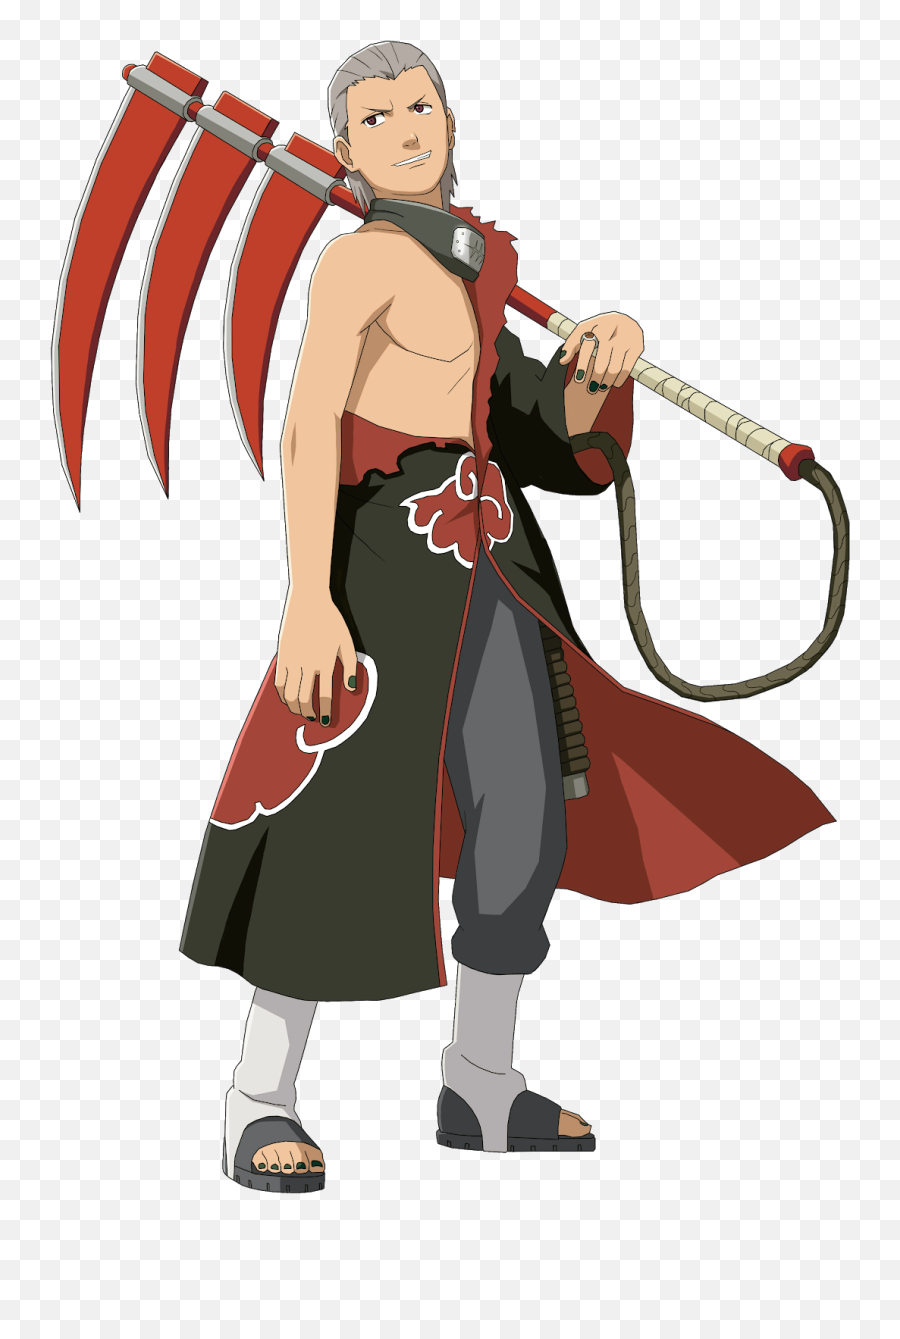 Ninjas From The Naruto Universe - Hidan Png Emoji,Whomst Has Summoned The Almighty One Emoji